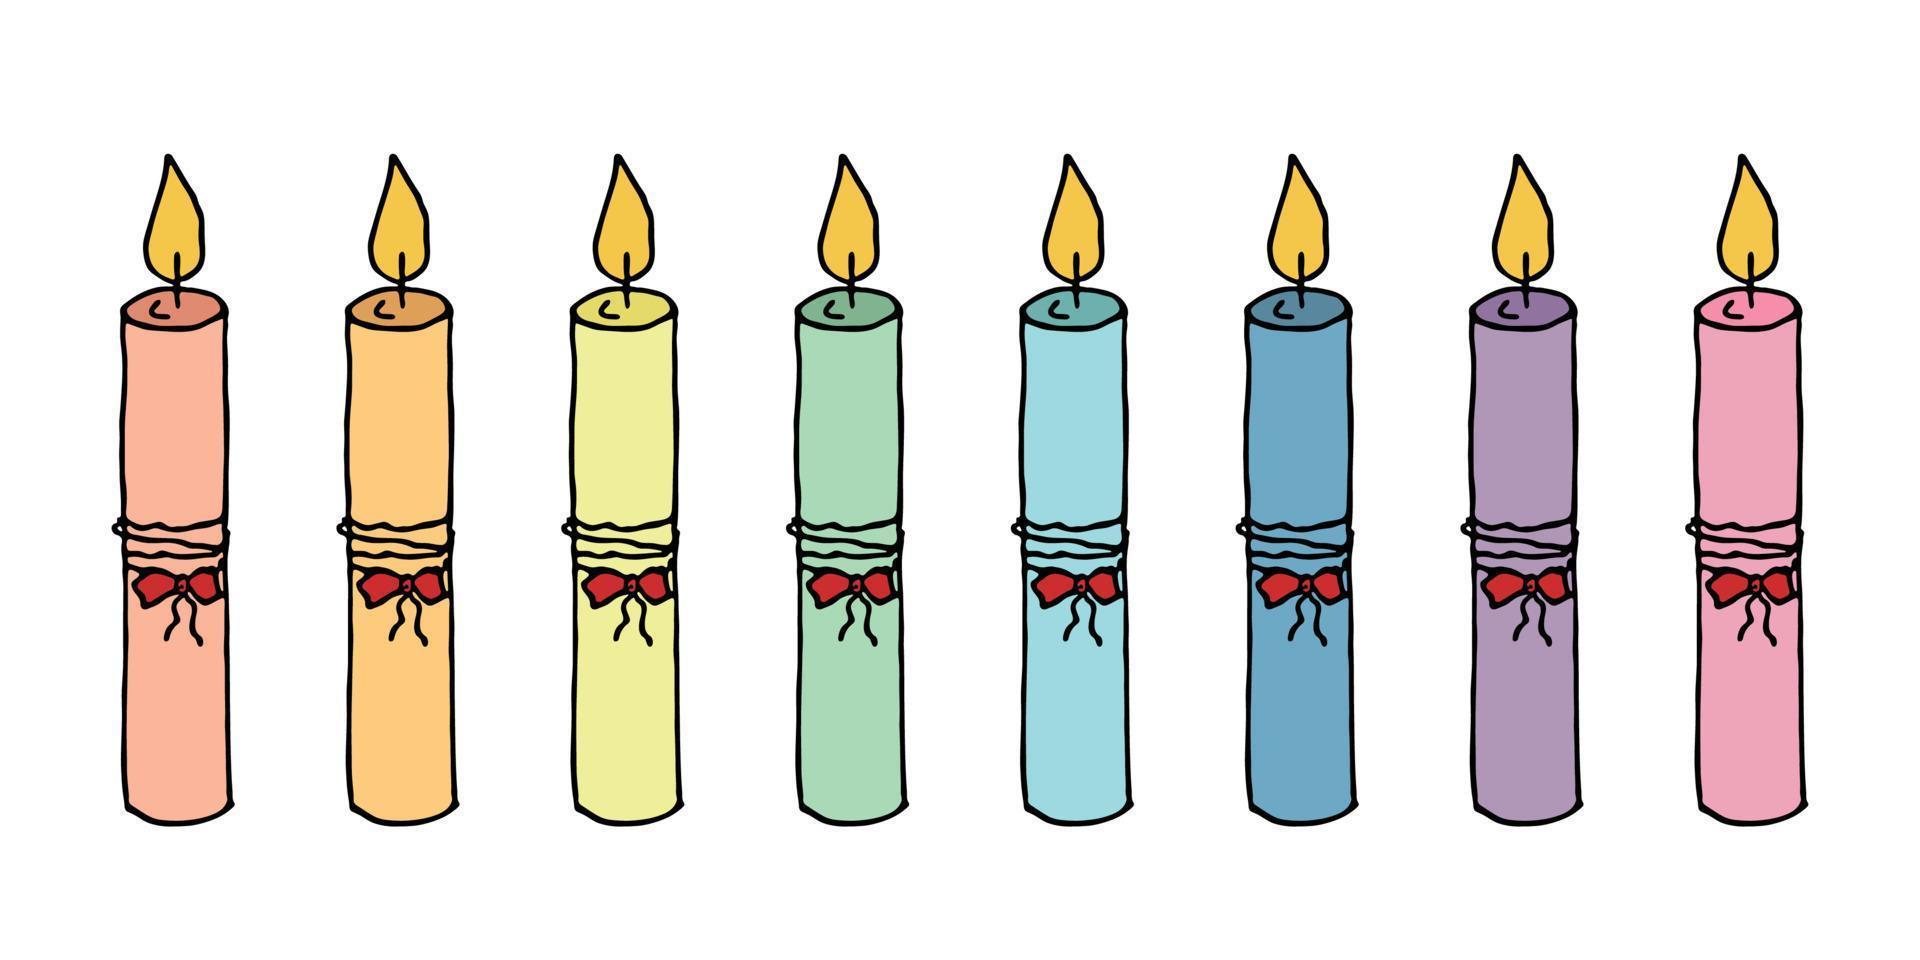 Burning birthday candle set. Doodle illustration. Hand drawn clipart for card, logo, design vector